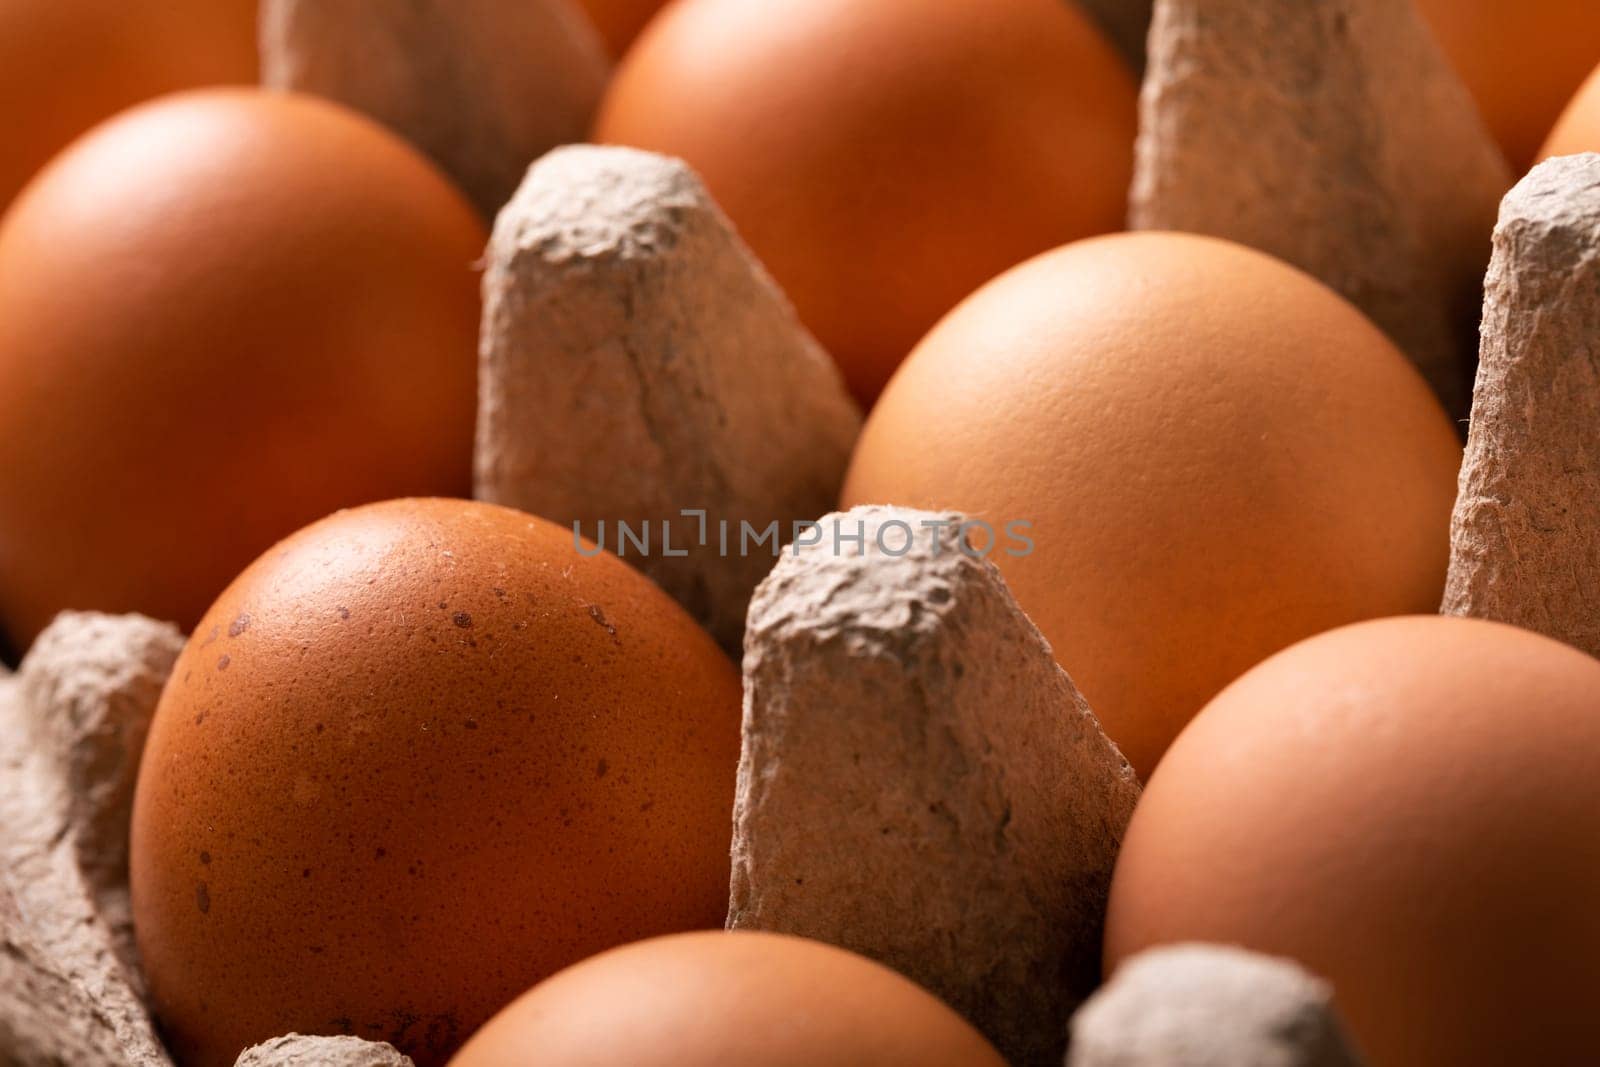 Full frame close-up shot of fresh brown eggs on carton. unaltered, food, healthy eating concept.